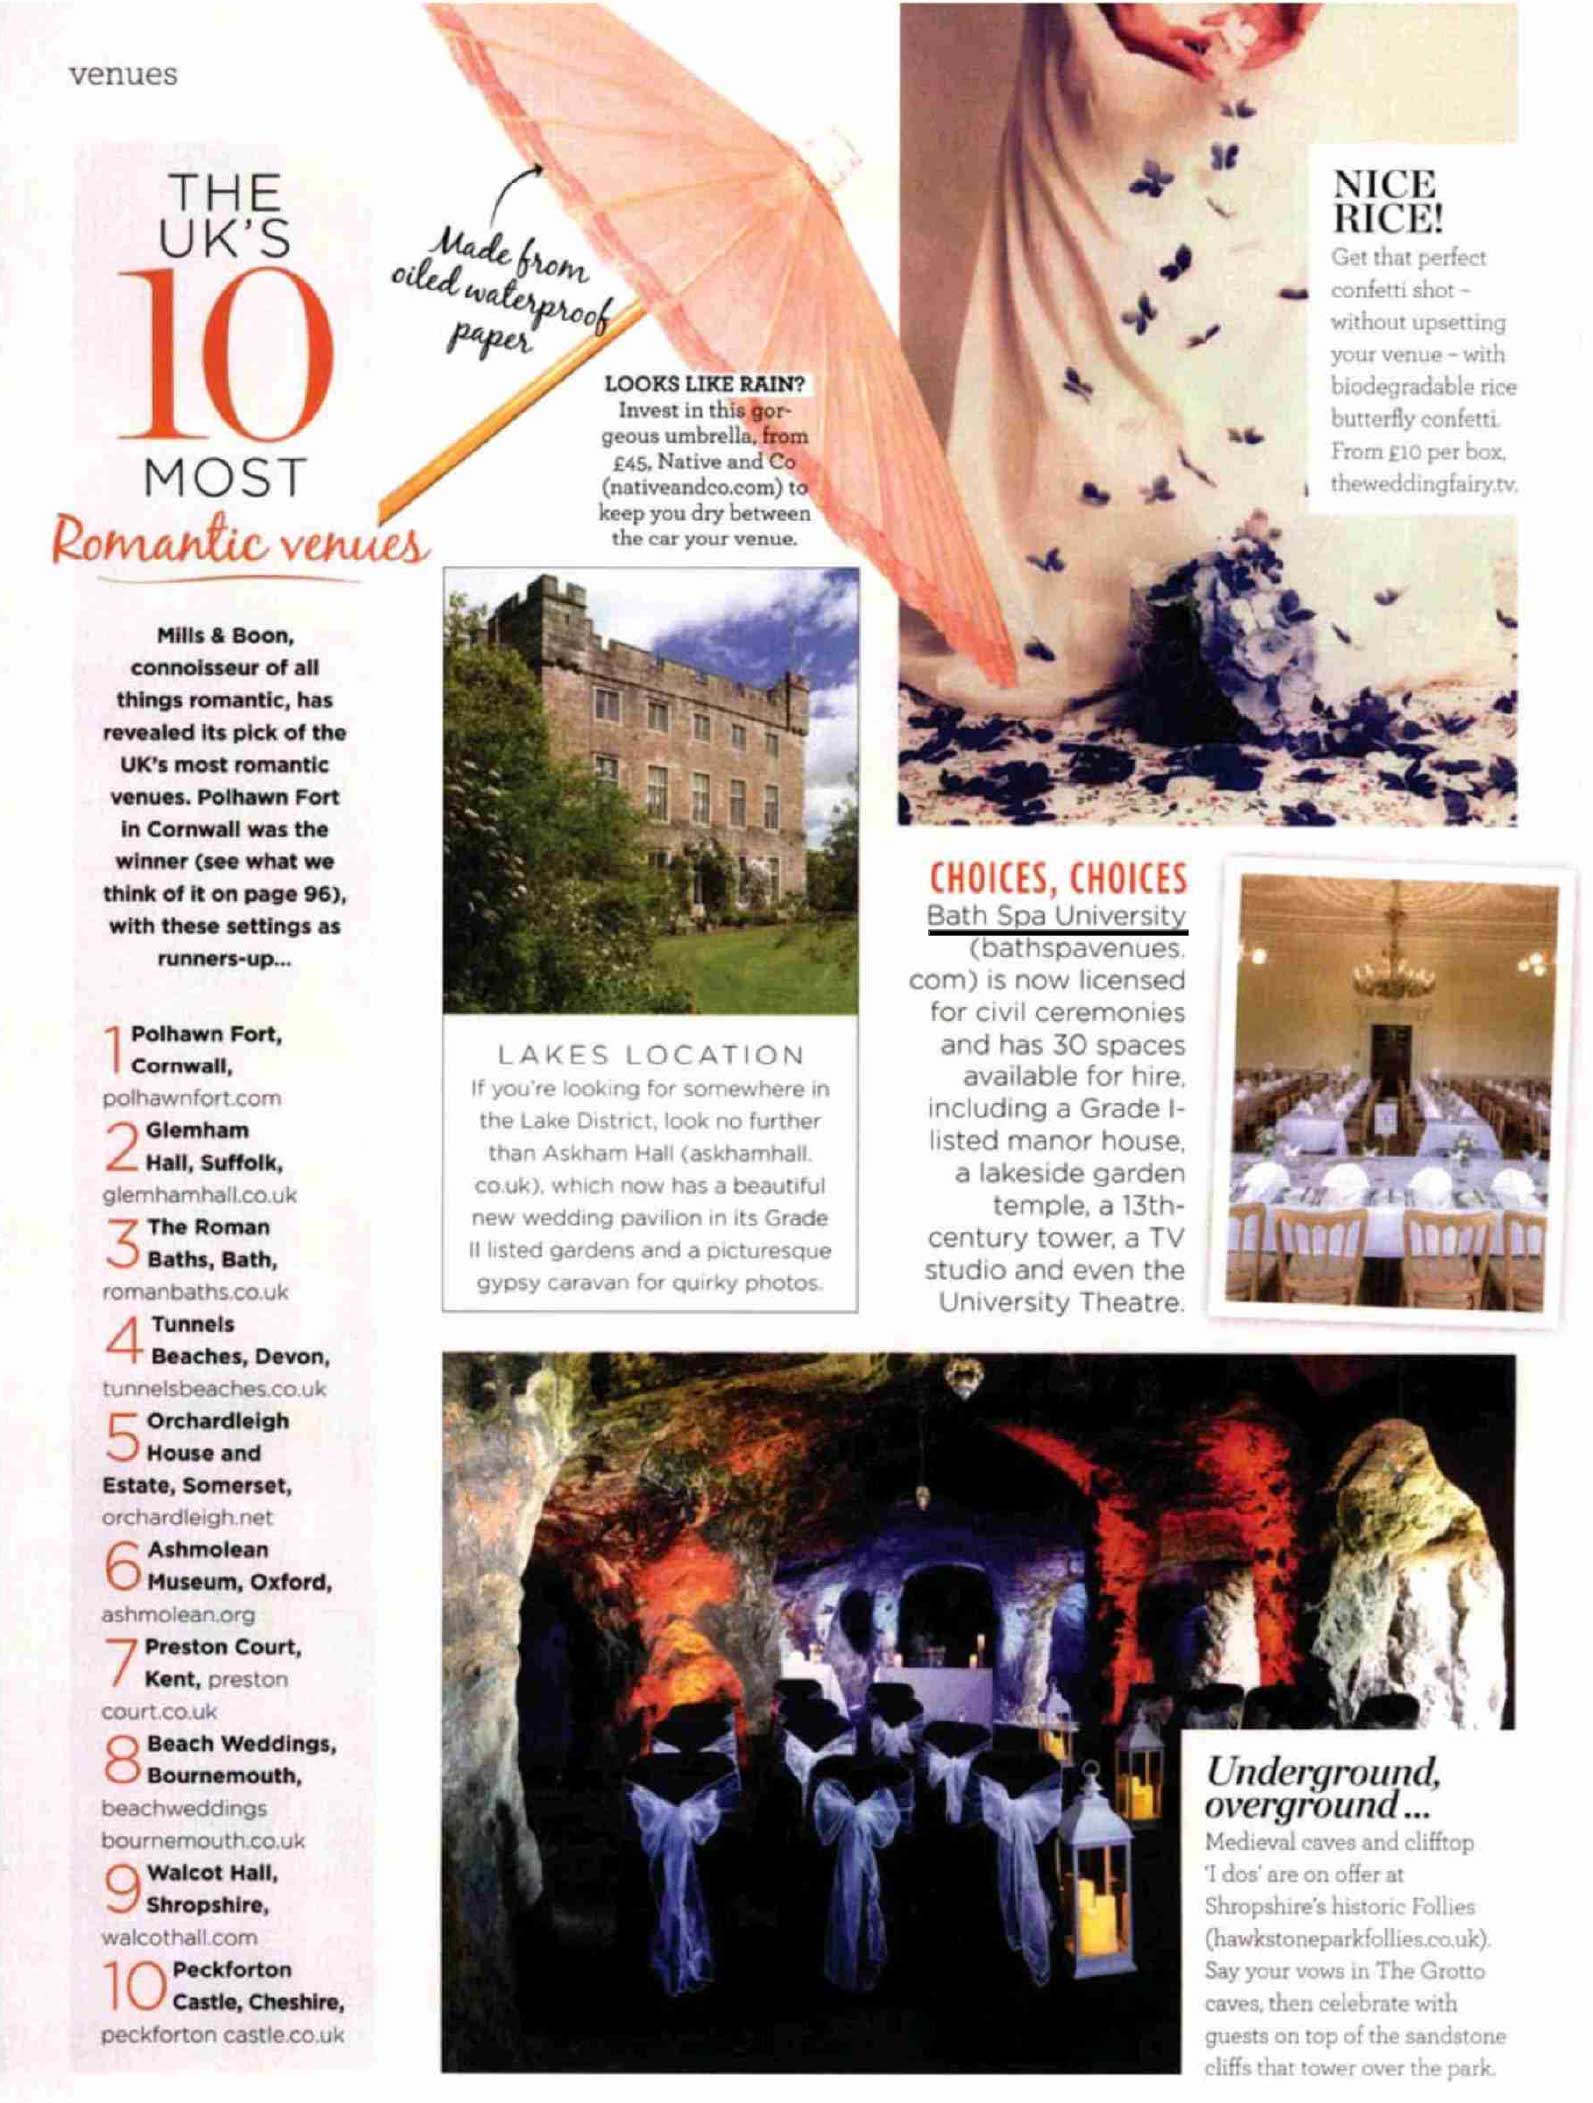 Wedding Venues and Services Magazine